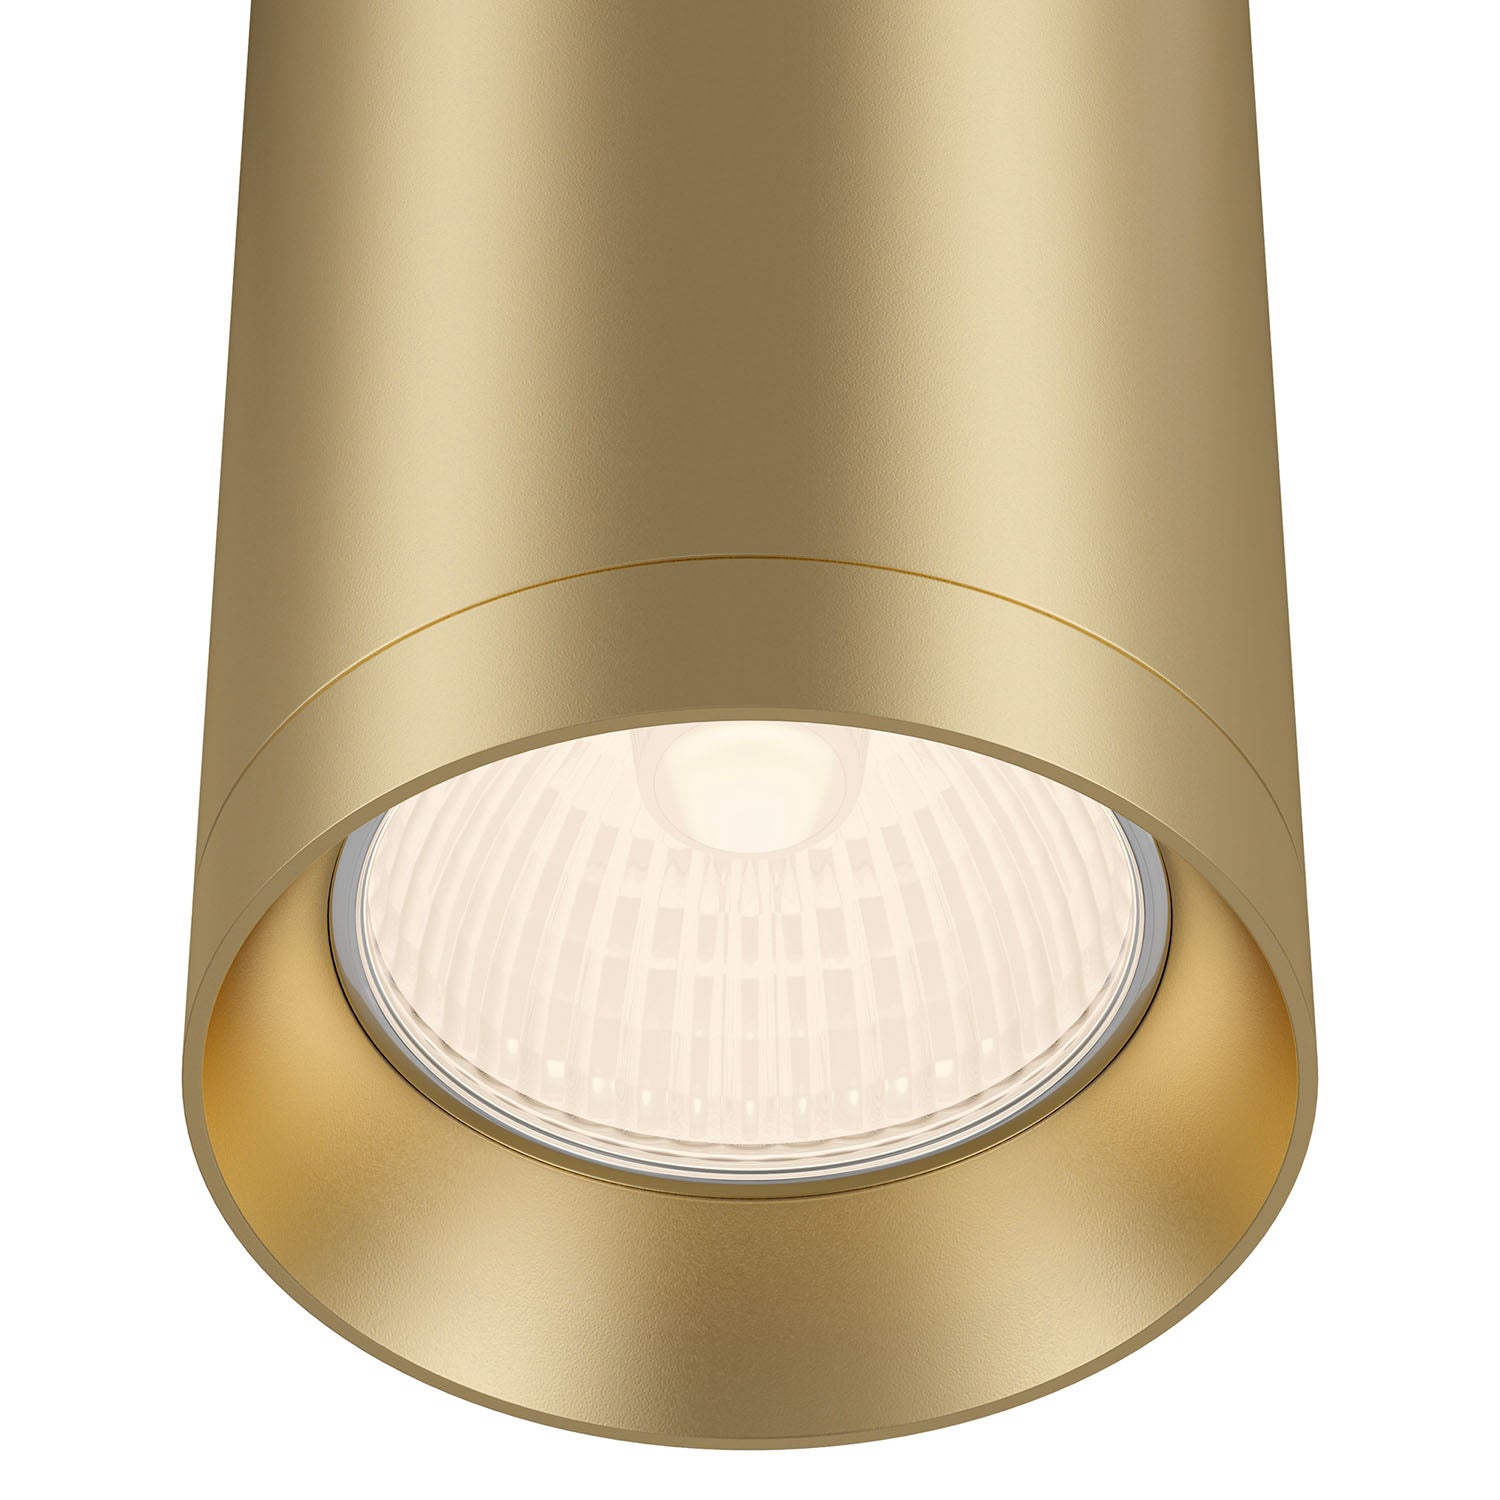 SHELBY - Cylindrical pendant light in gold, white or black steel